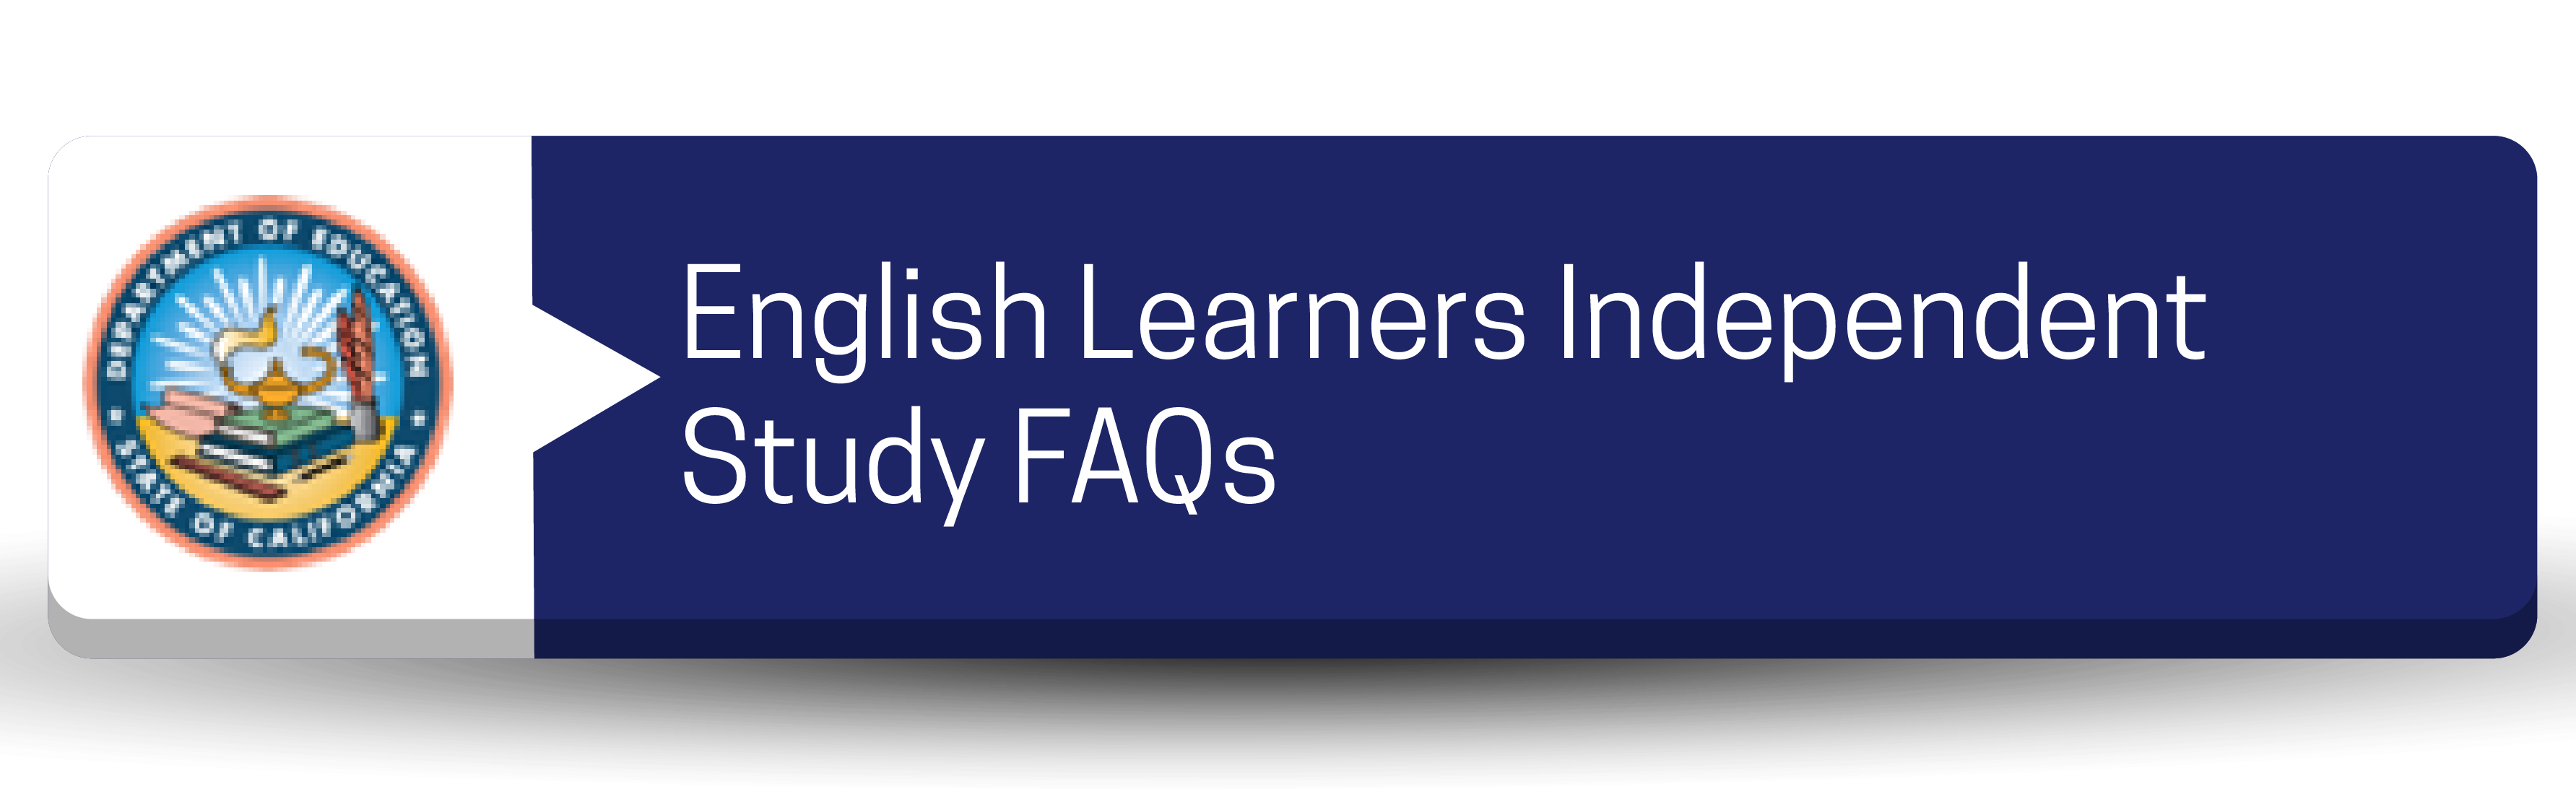 English Learners Independent Study FAQs Button